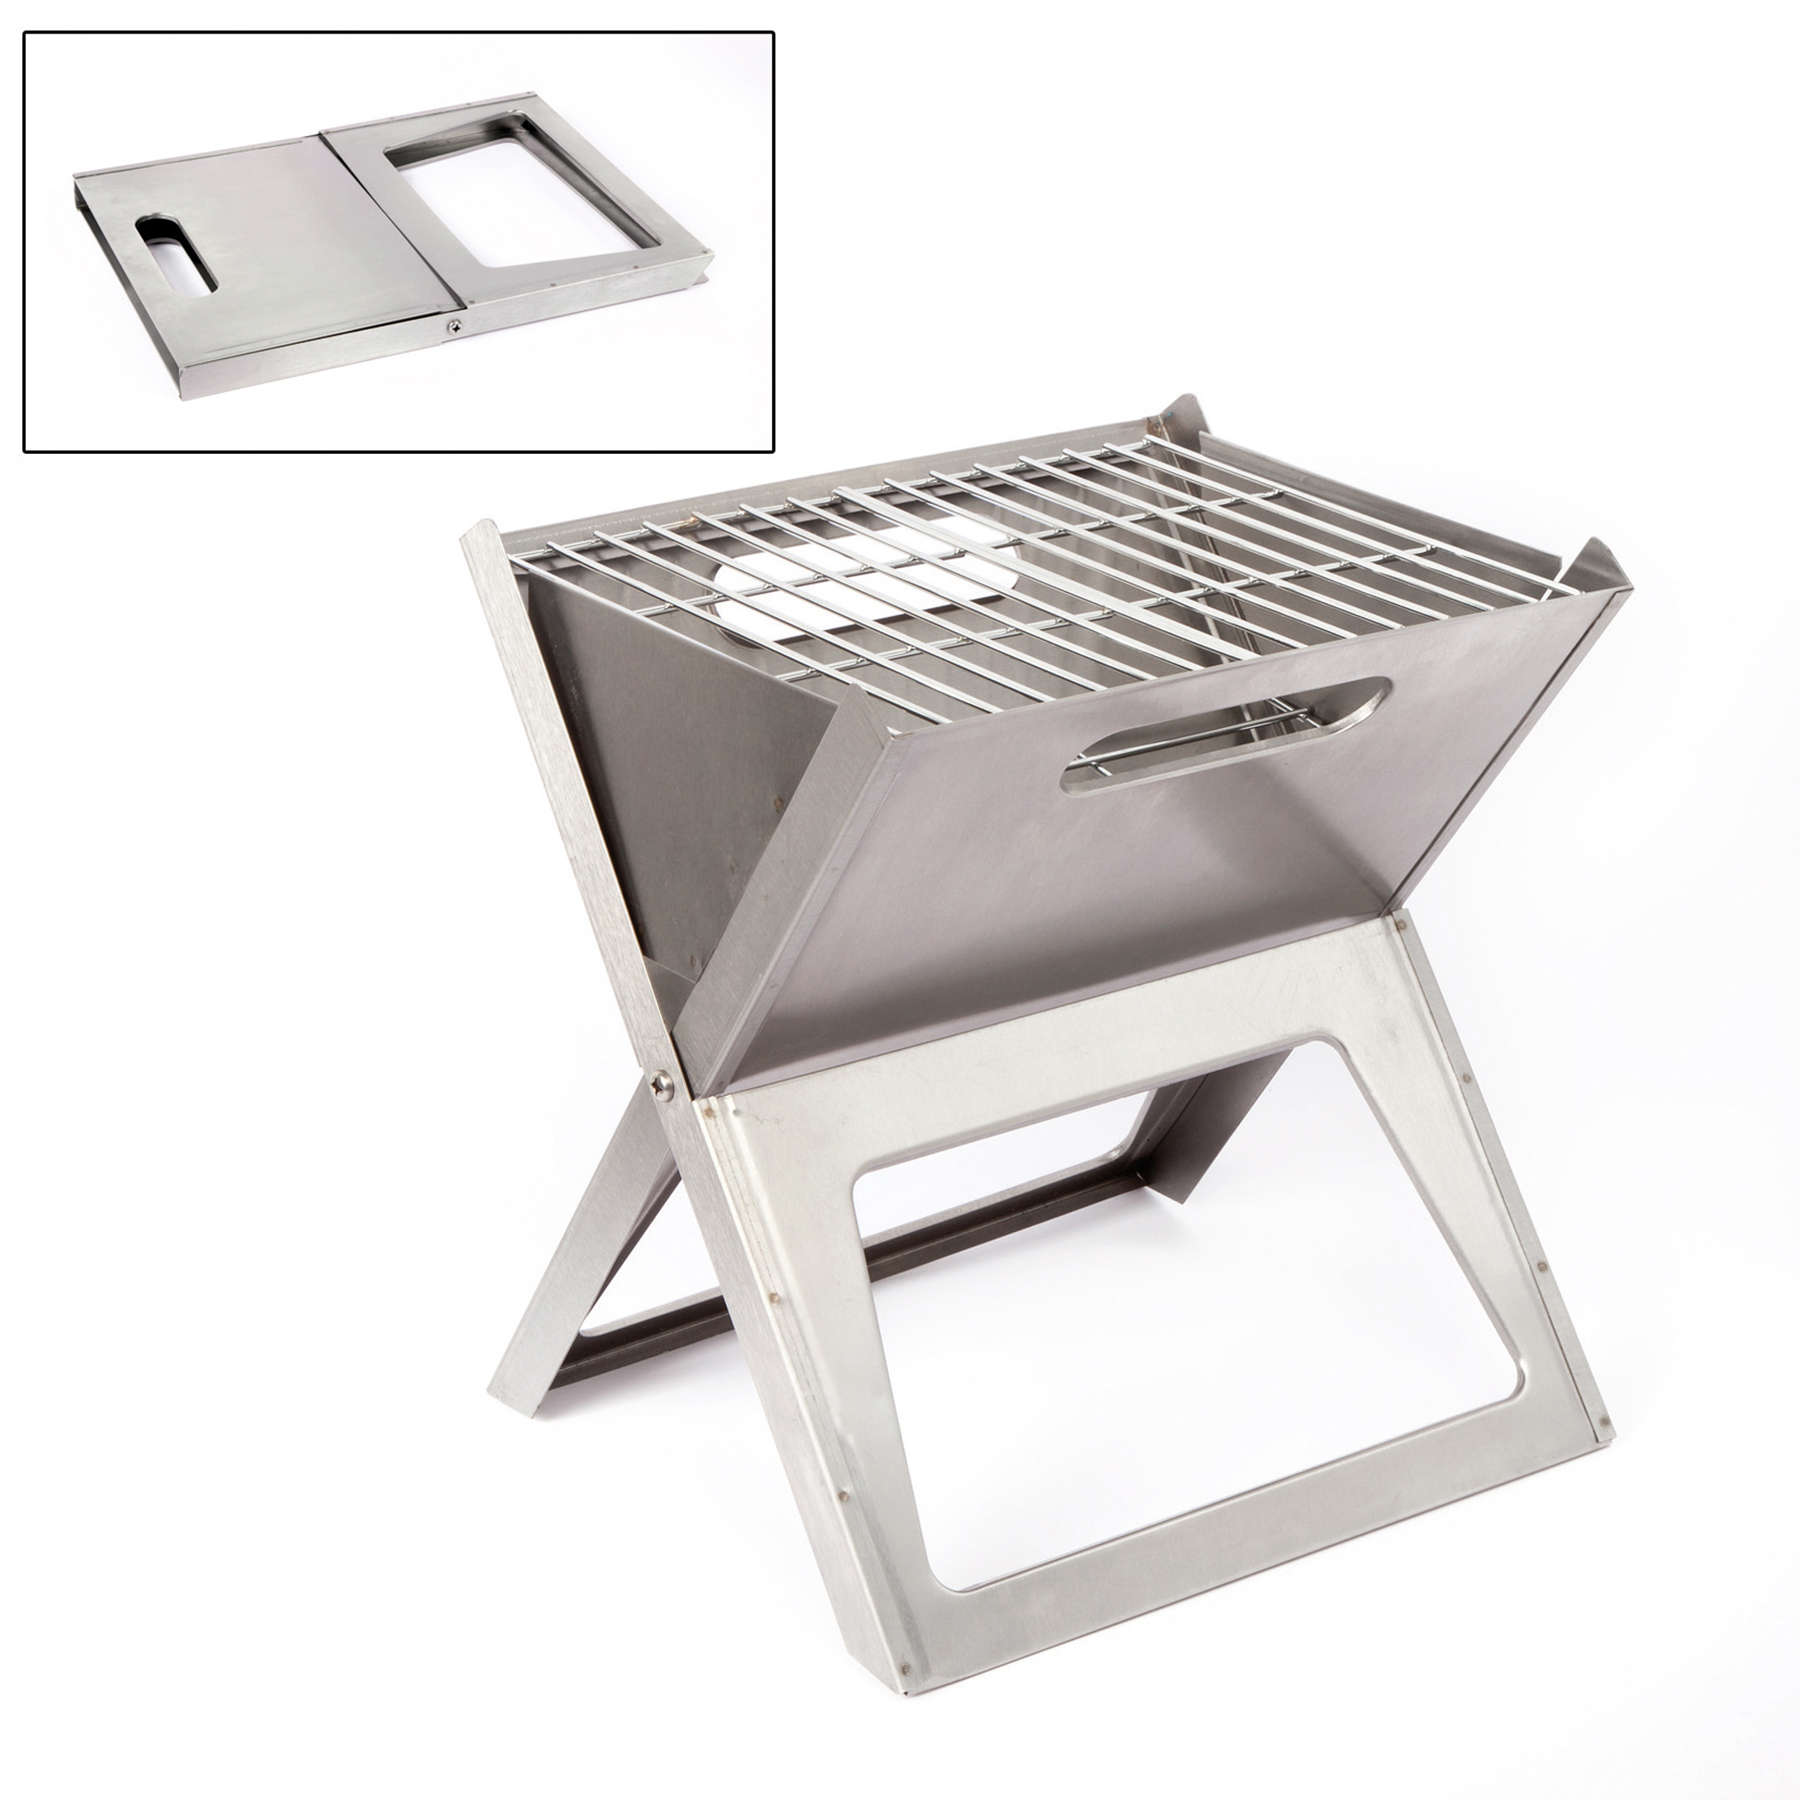   Bo-Camp Notebook / Fire Basket Compact Silver (8108347)